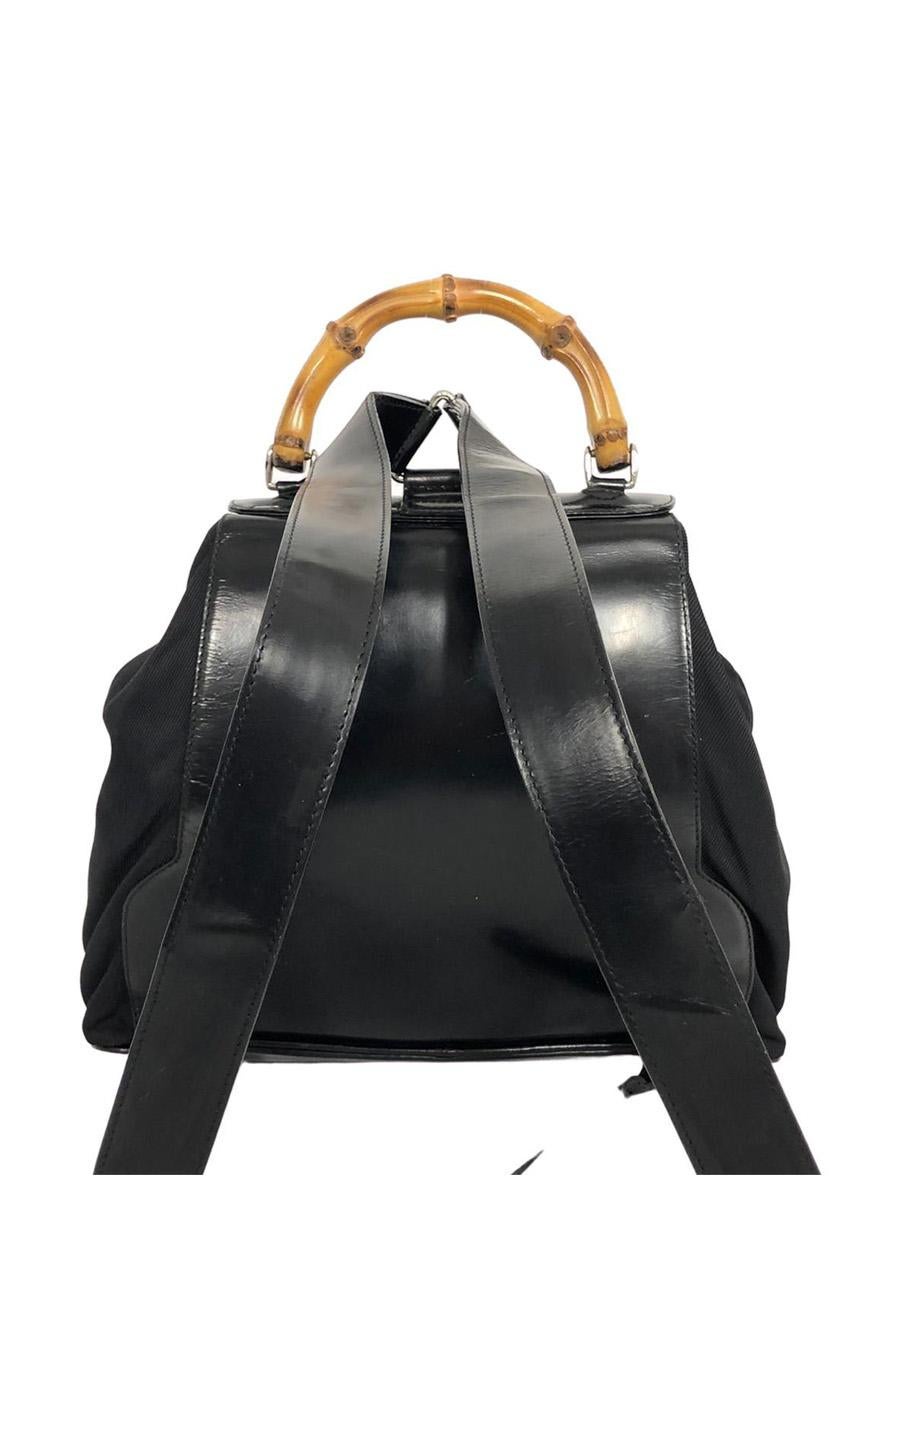 Gucci Bamboo Backpack, size big, in black Cloth wit patent leather details. Characteristic of this bag is the famous curved bamboo handle at the top of the bag. The hardware is silver-colored. The bag closes with a belt buckle and a leather